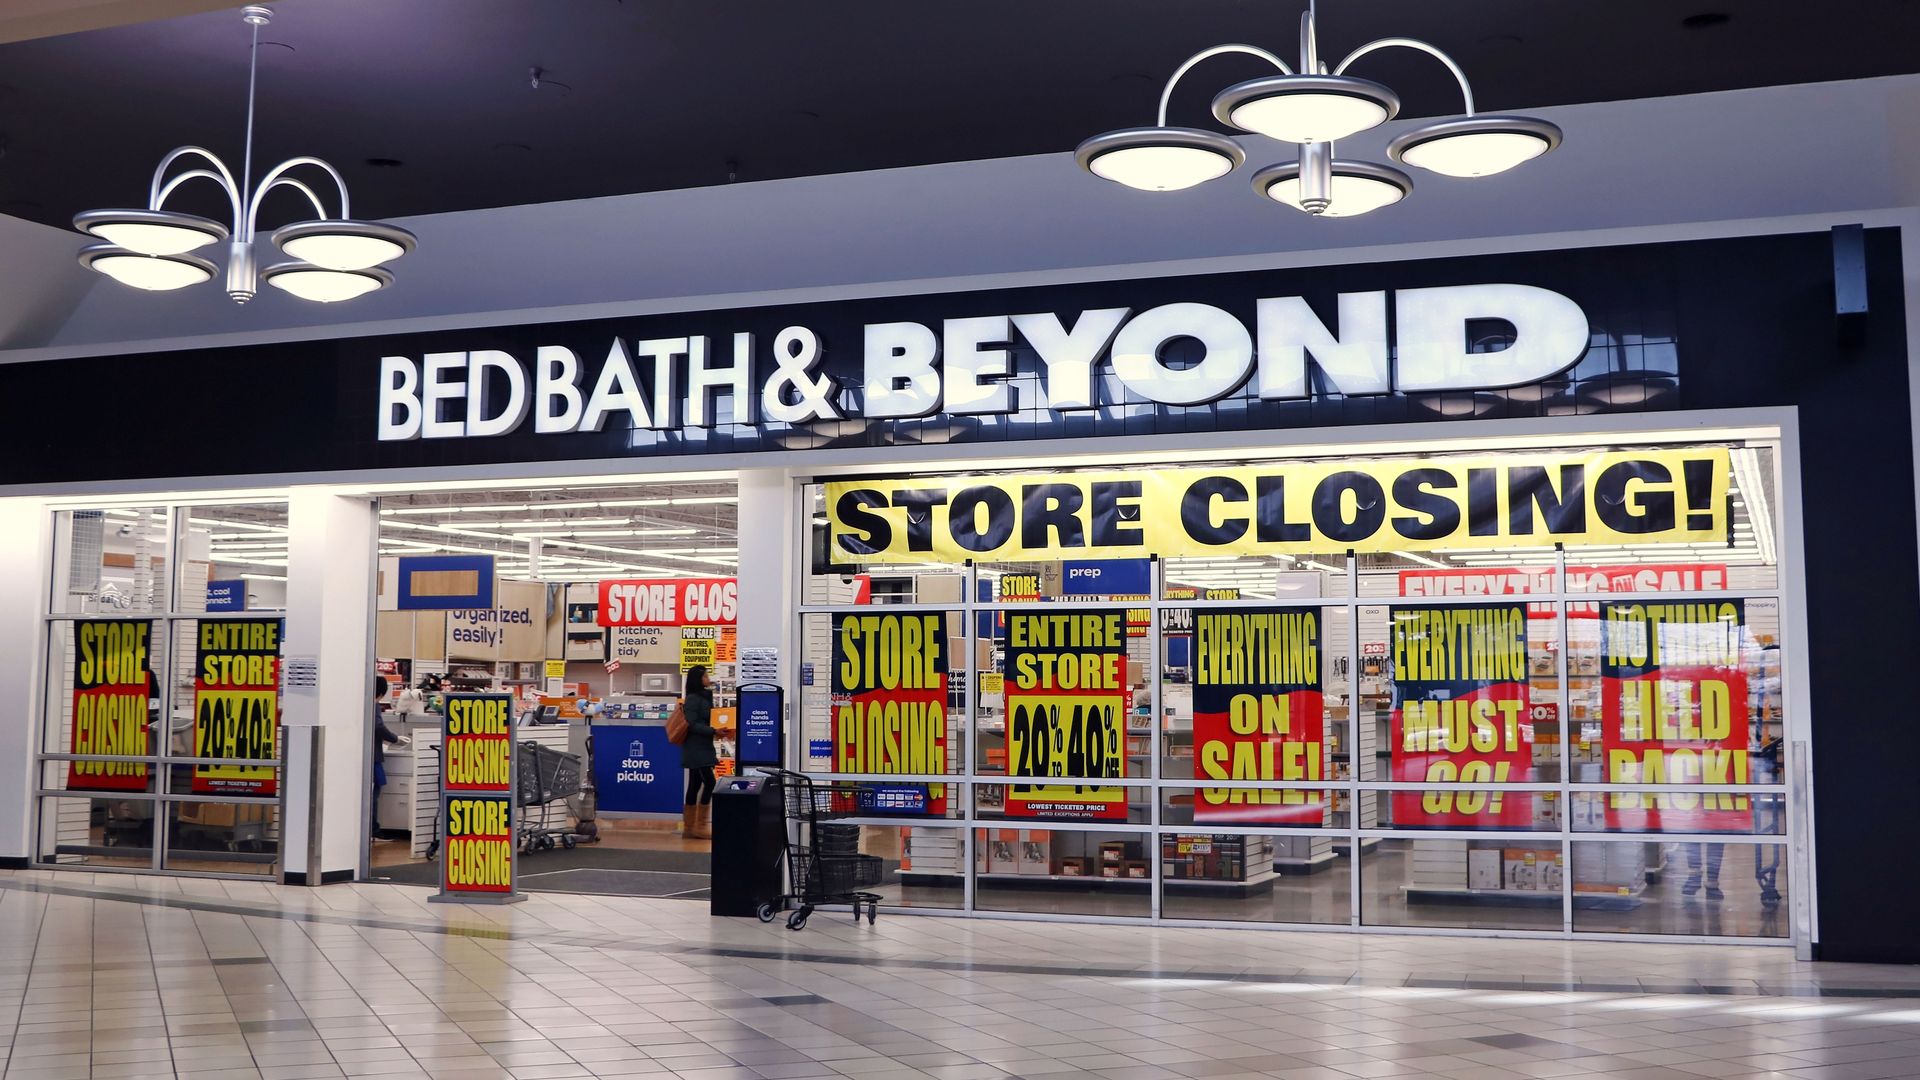 A store closing sign hanging over a Bed Bath & Beyond store front.